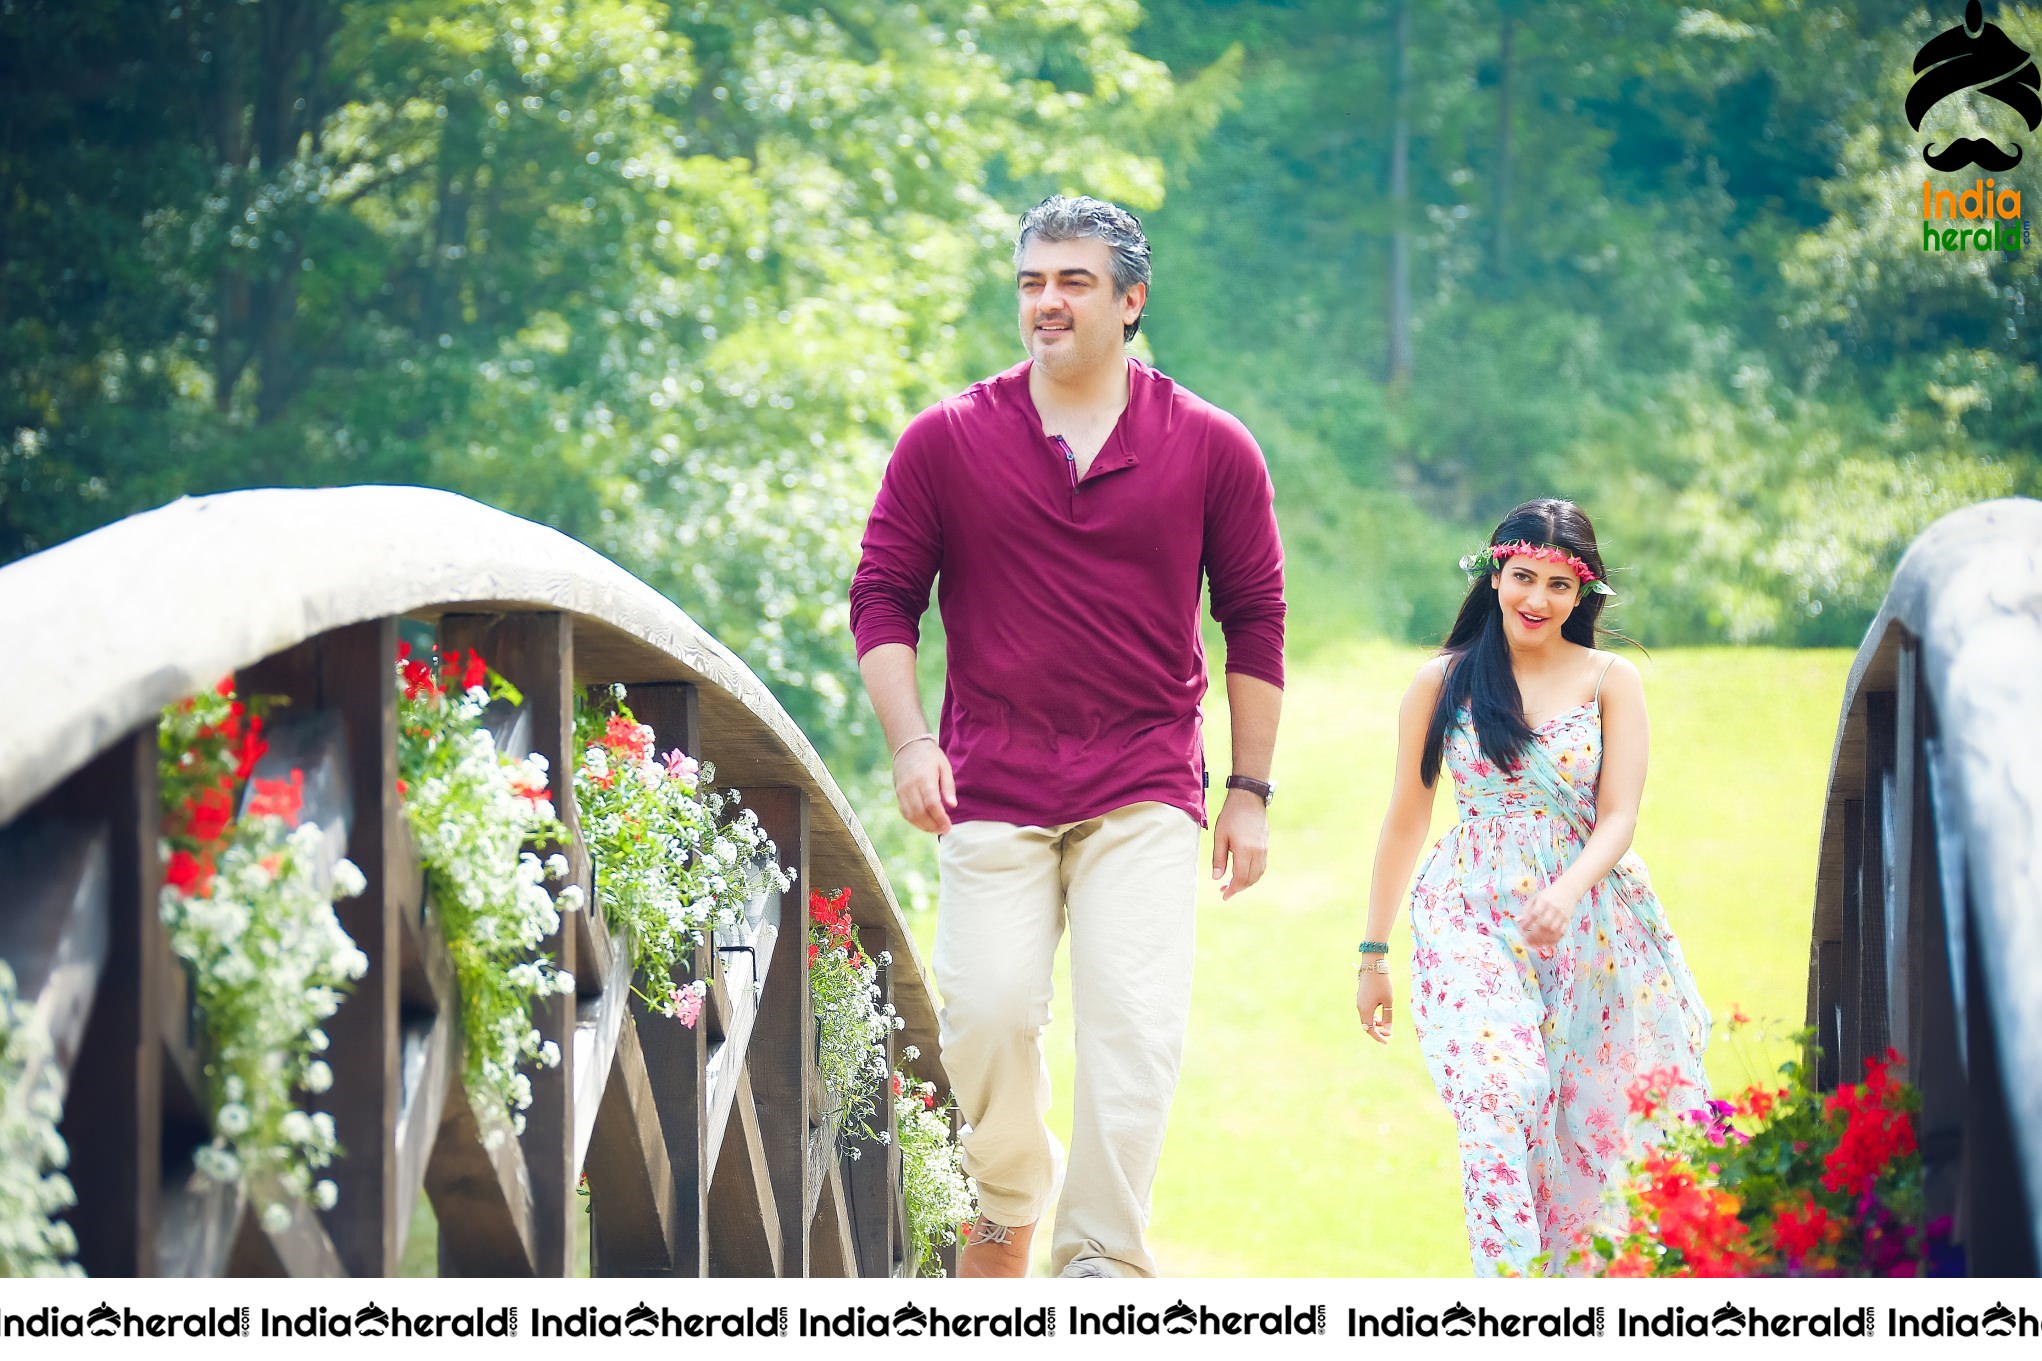 Rare and Unseen Stills of Ajith and Shruti Haasan in Vedalam Set 2